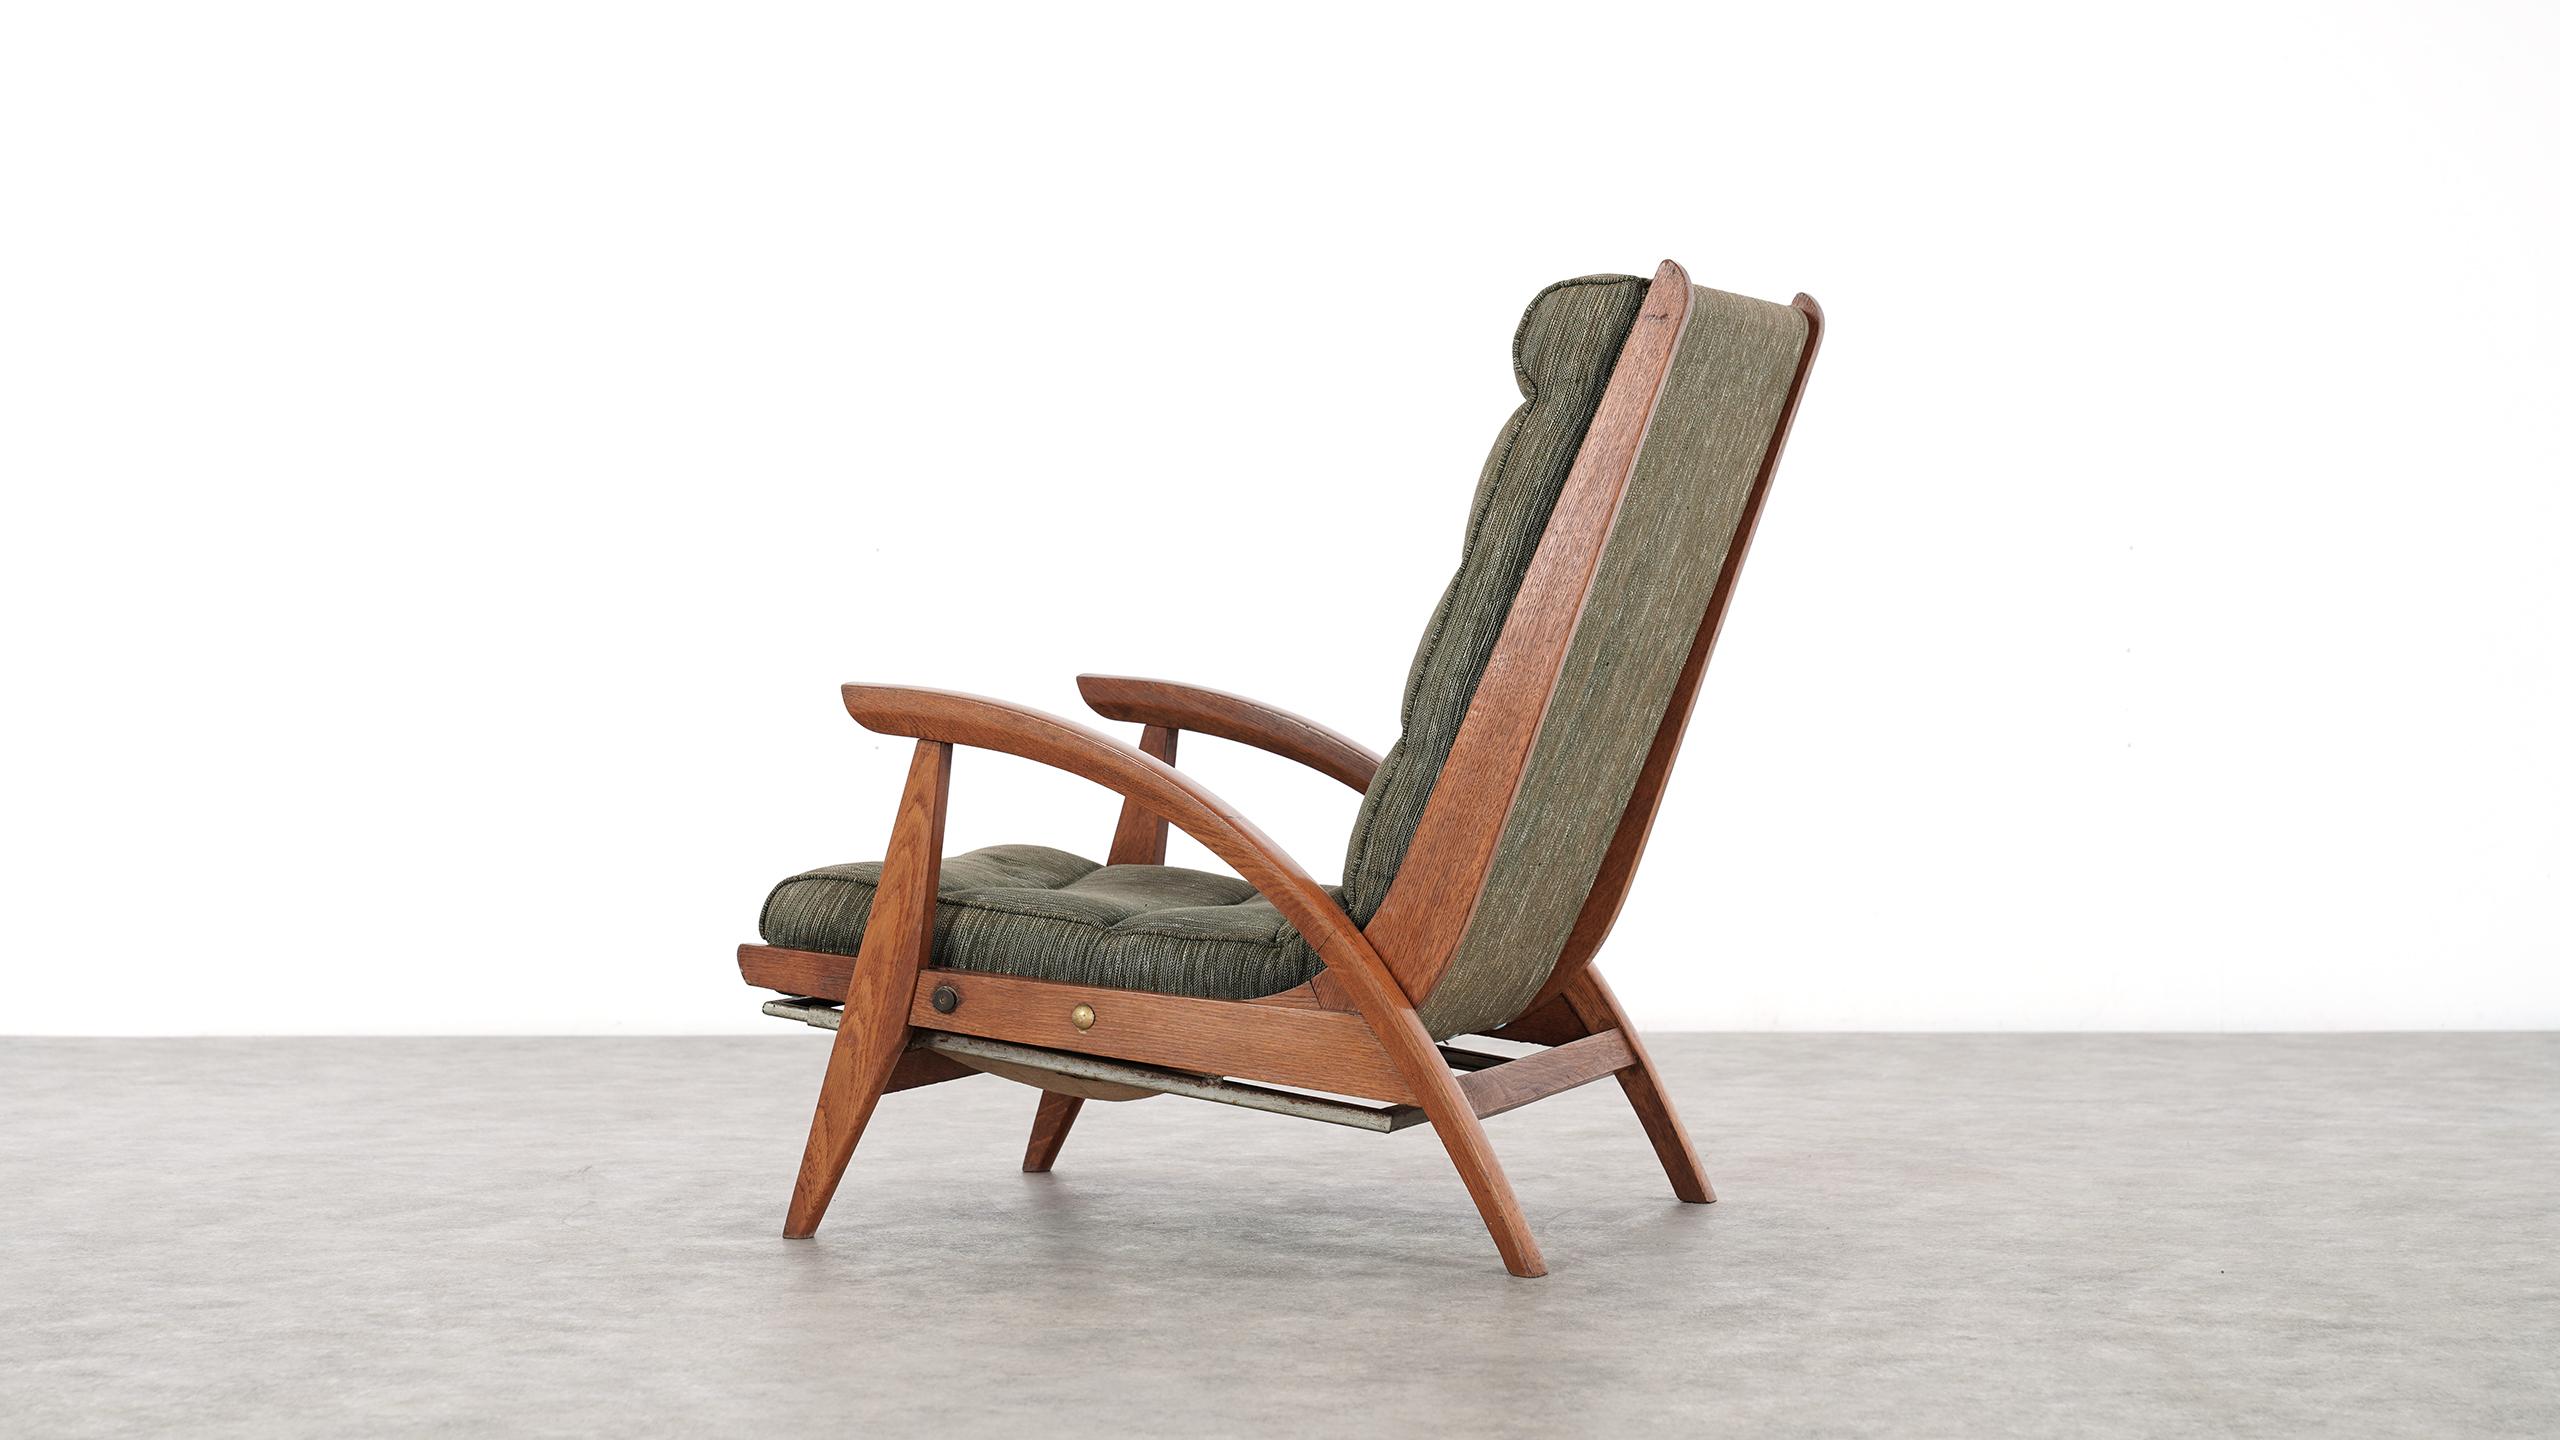 Guy Besnard FS 134 Reclining Lounge Chair, 1954 for Free Span, France Prouvé 12